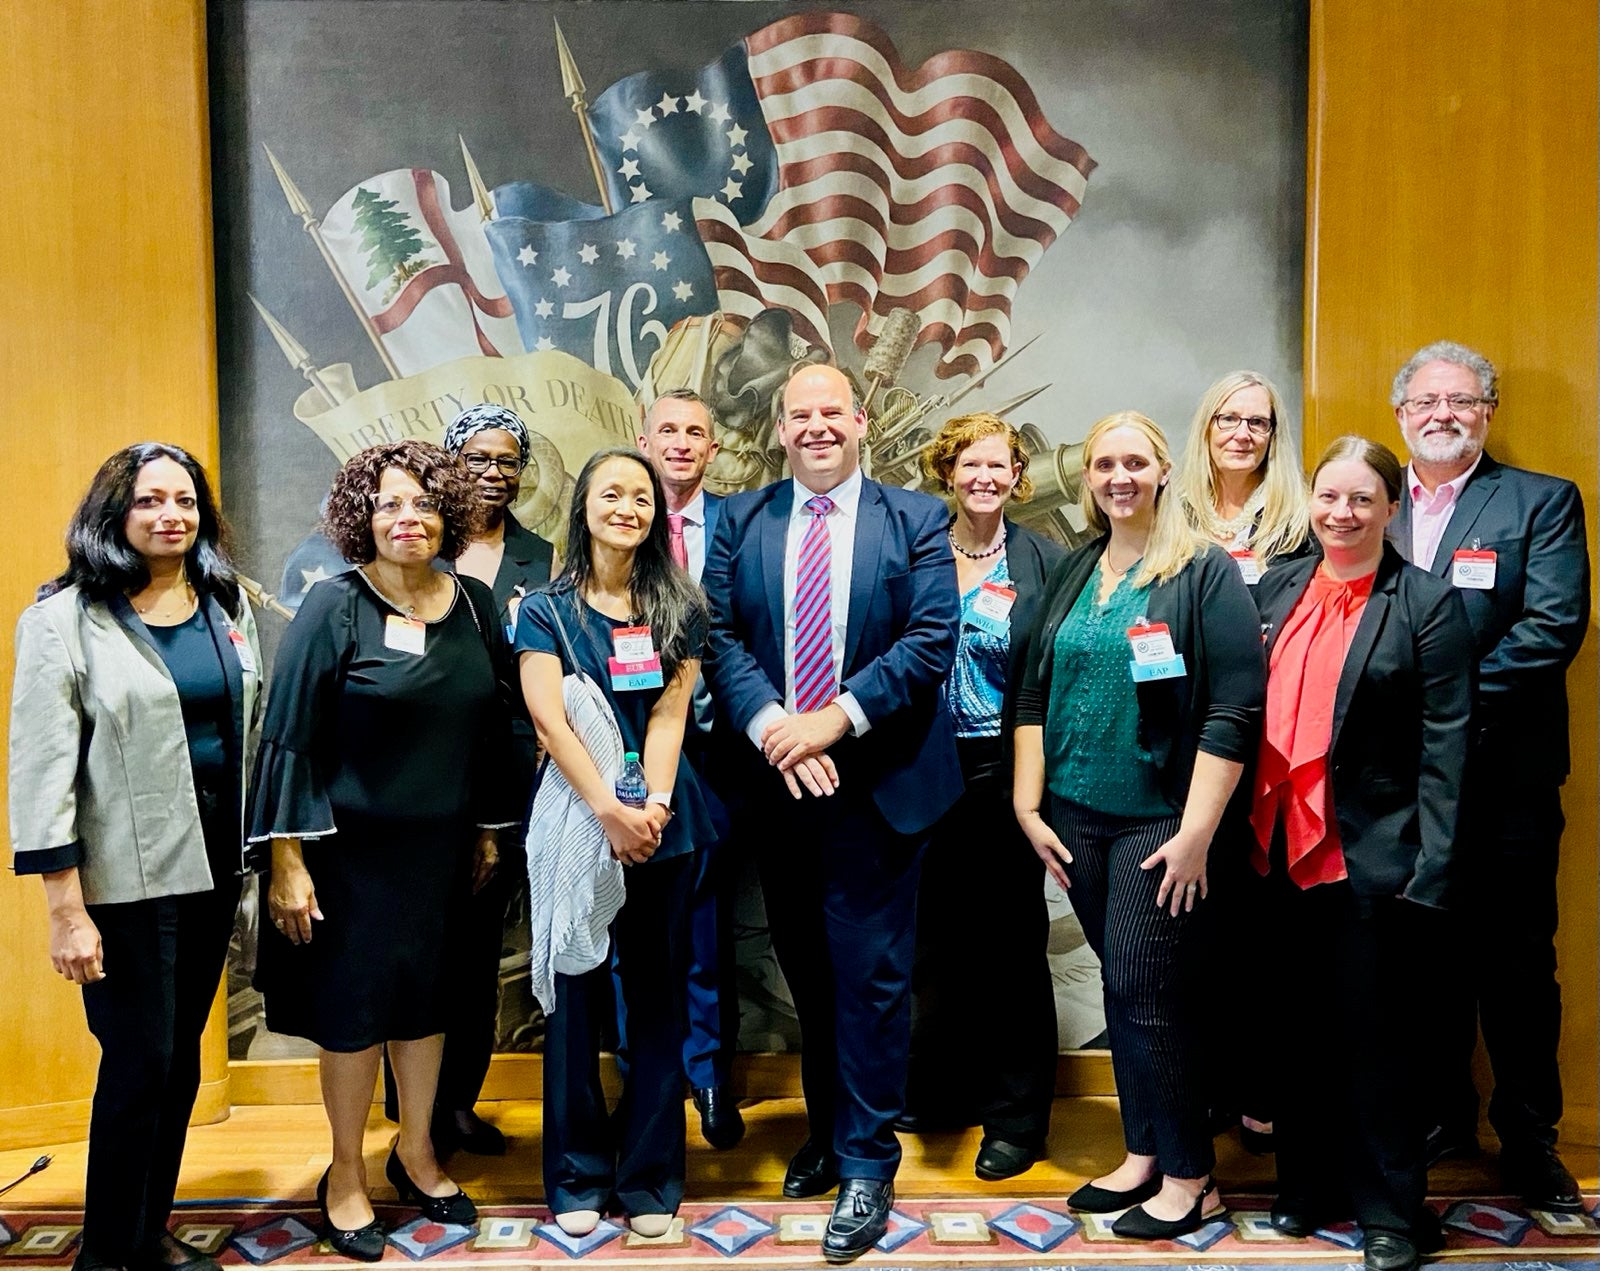 10 English Language Programs alumni with Deputy Assistant Secretary Ethan Rosenzweig pose in front of a large backdrop picture of U.S. flags